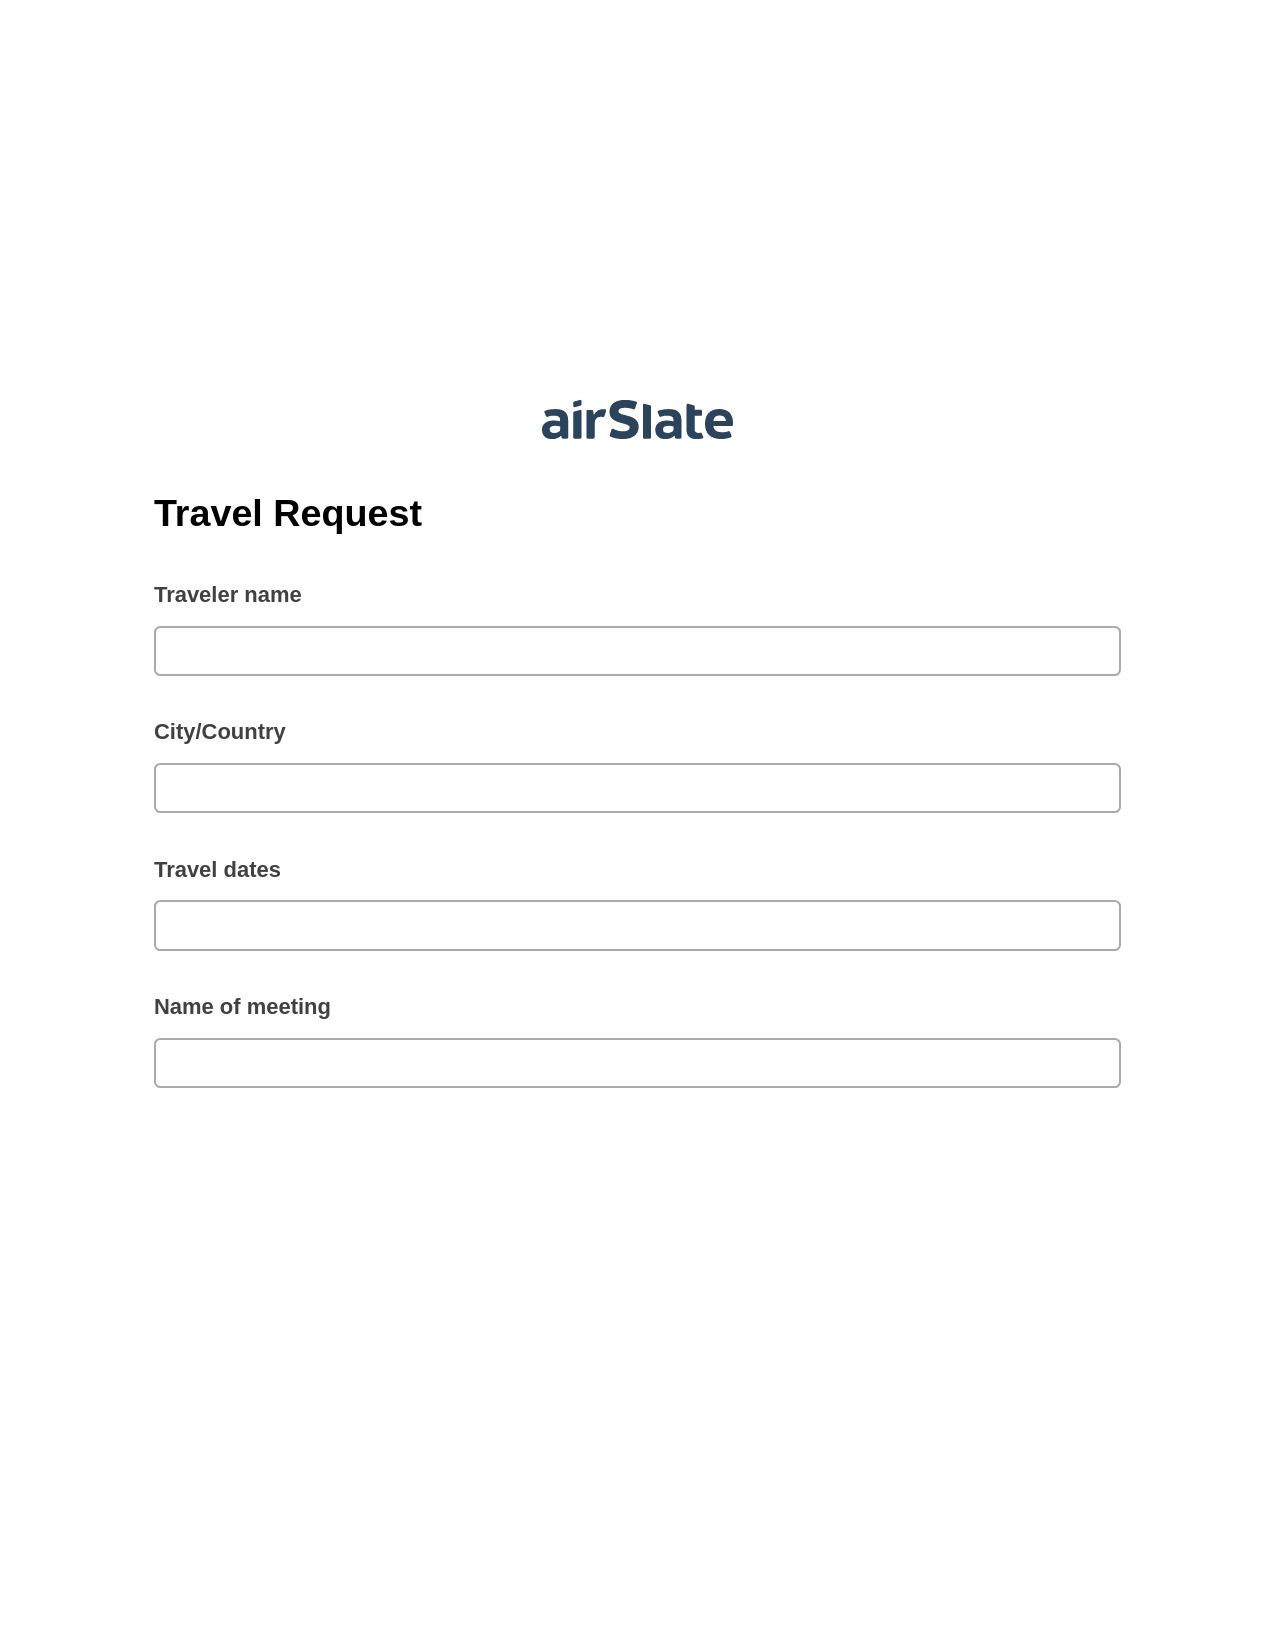 Travel Request Pre-fill Dropdowns from CSV File Bot, Create slate addon, Export to Google Sheet Bot